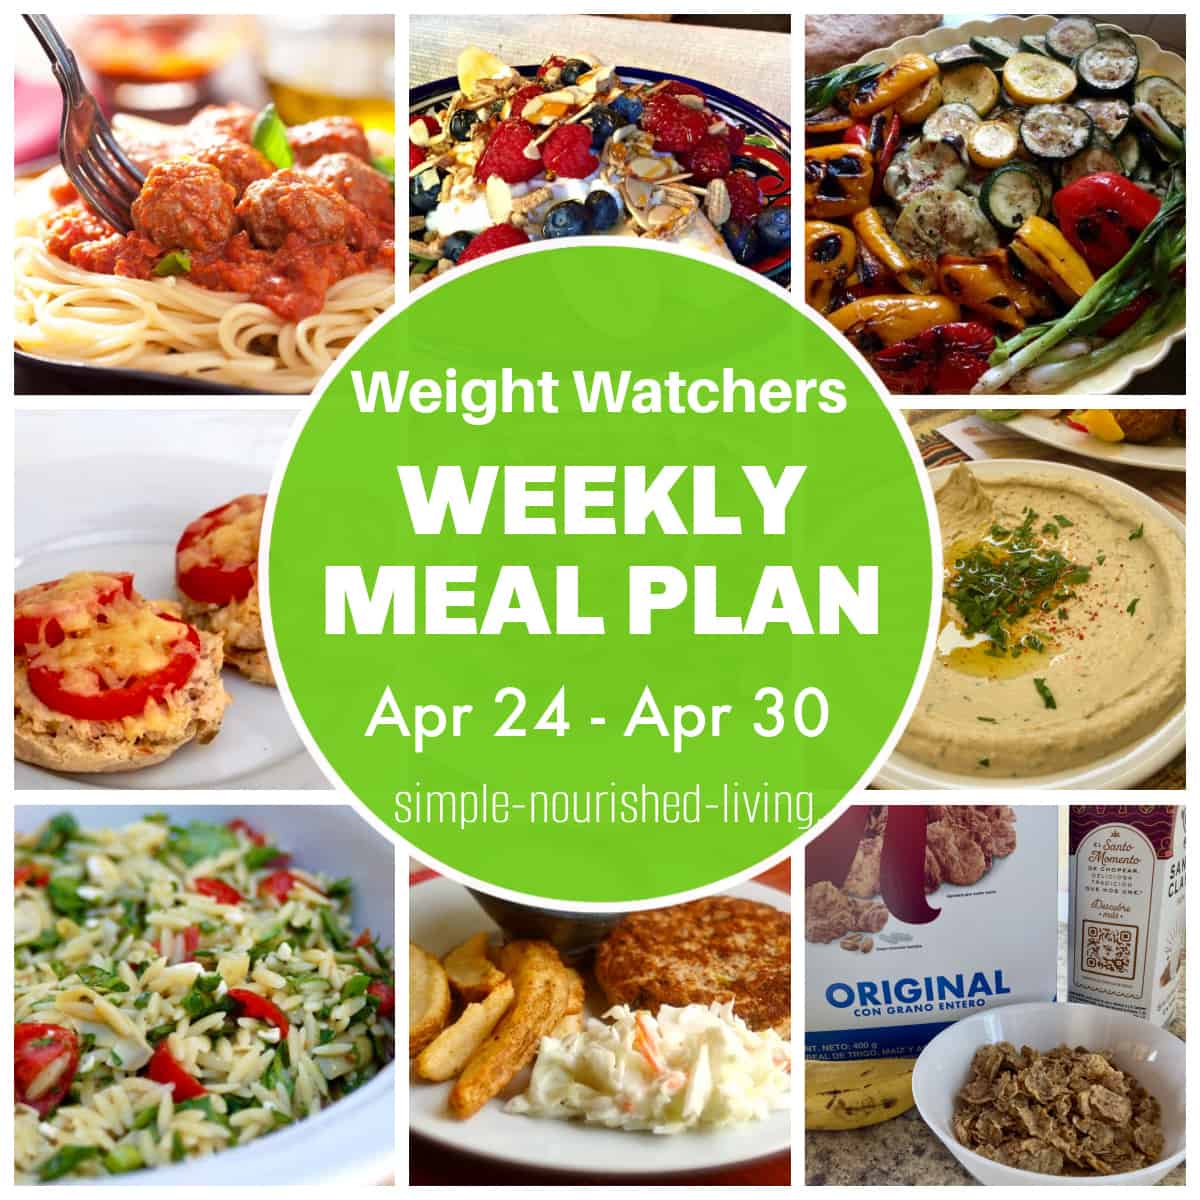 WW Weekly Meal Plan Photo Collage featuring spaghetti and meatballs, cottage cheese banana split, grilled vegetables, english muffin tuna melt, hummus, orzo salad, salmon patties, special k cereal.